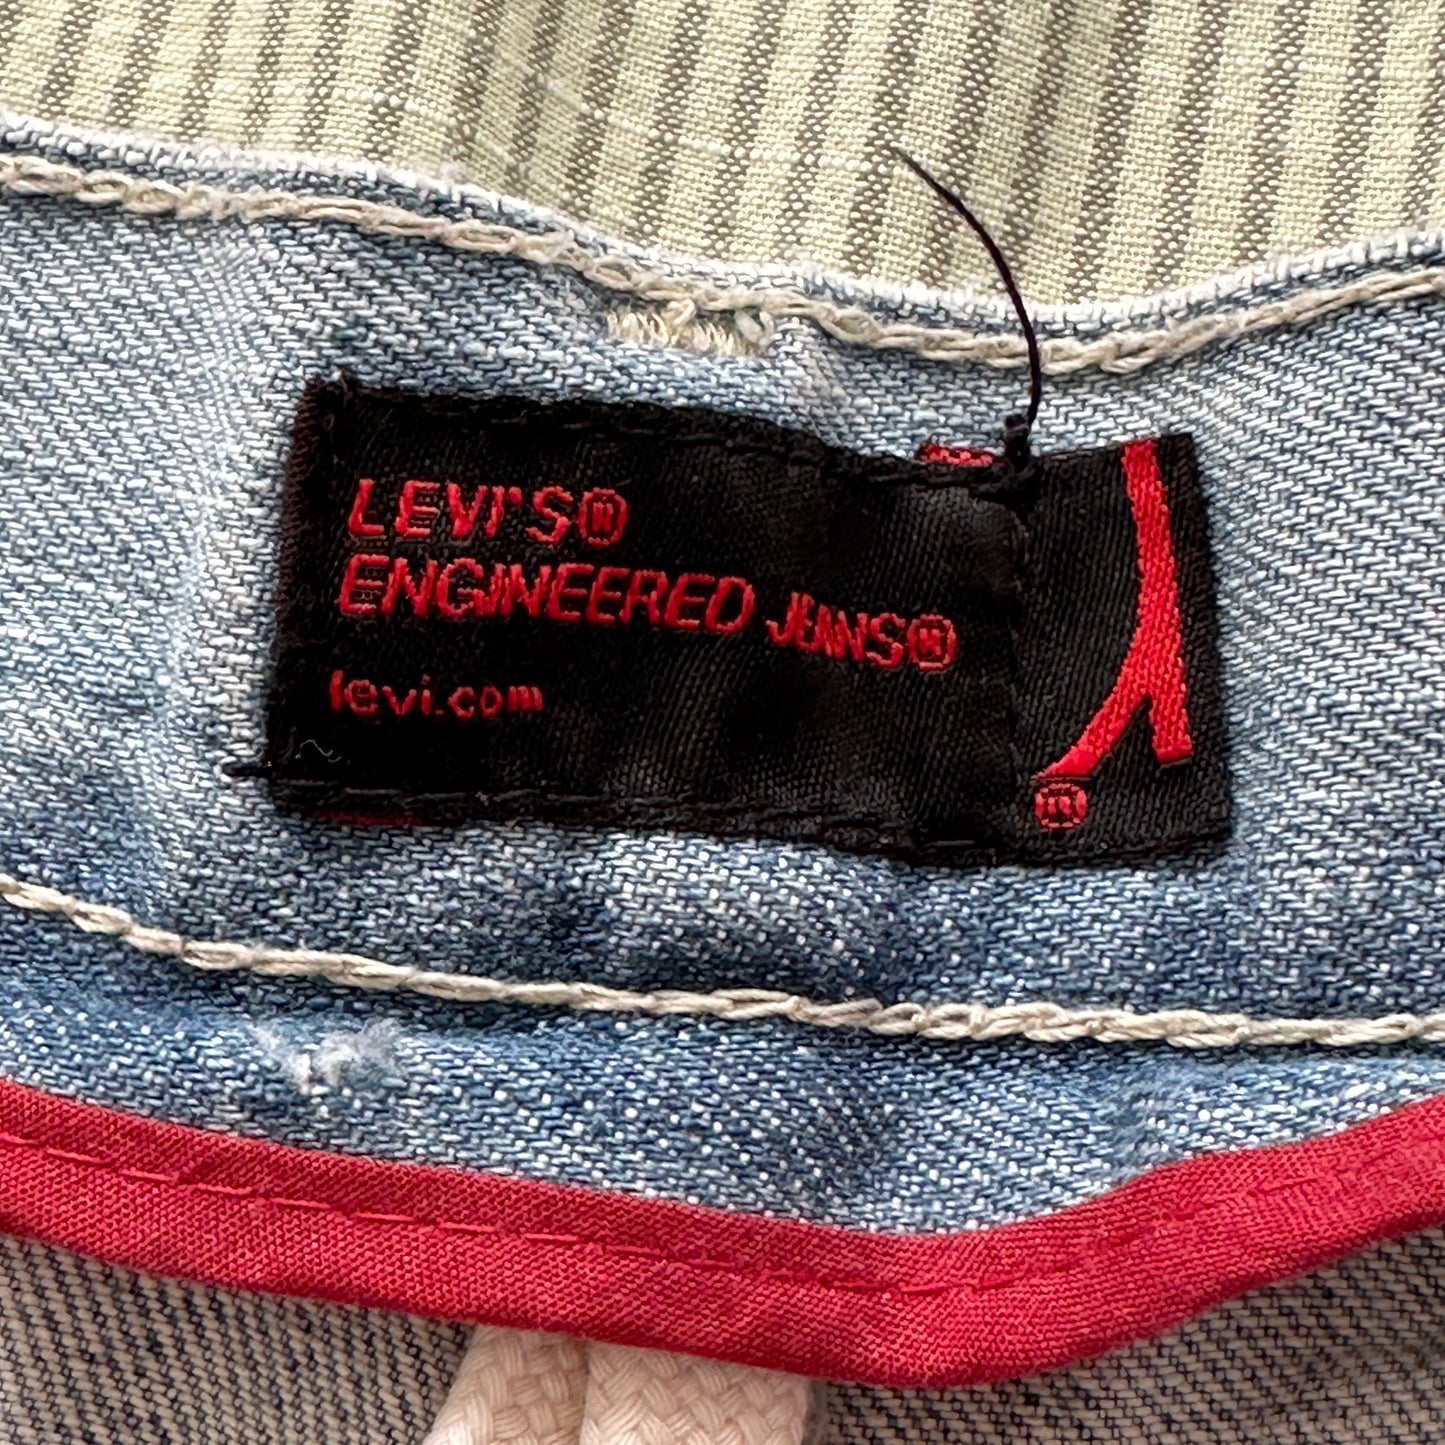 Levi's Engineered Jeans Shorts